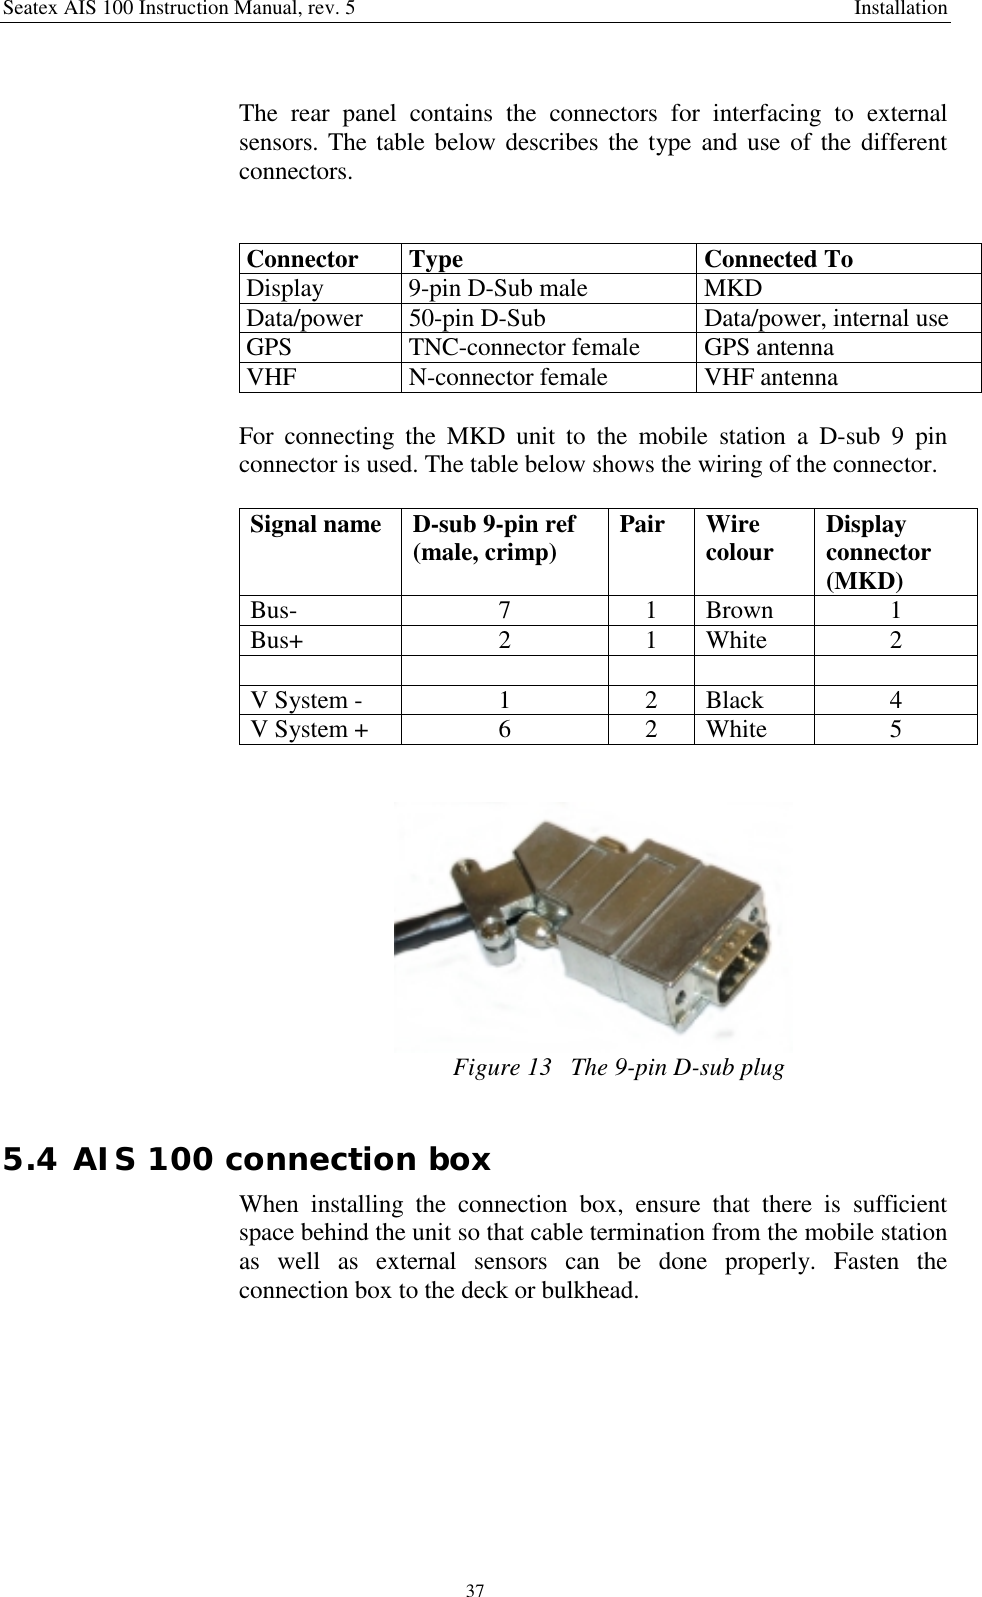 Seatex AIS 100 Instruction Manual, rev. 5 Installation37The rear panel contains the connectors for interfacing to externalsensors. The table below describes the type and use of the differentconnectors.Connector Type Connected ToDisplay 9-pin D-Sub male MKDData/power 50-pin D-Sub Data/power, internal useGPS TNC-connector female GPS antennaVHF N-connector female VHF antennaFor connecting the MKD unit to the mobile station a D-sub 9 pinconnector is used. The table below shows the wiring of the connector.Signal name D-sub 9-pin ref(male, crimp) Pair Wirecolour Displayconnector(MKD)Bus- 7 1 Brown 1Bus+ 2 1 White 2V System - 1 2 Black 4V System + 6 2 White 5Figure 13   The 9-pin D-sub plug5.4 AIS 100 connection boxWhen installing the connection box, ensure that there is sufficientspace behind the unit so that cable termination from the mobile stationas well as external sensors can be done properly. Fasten theconnection box to the deck or bulkhead.